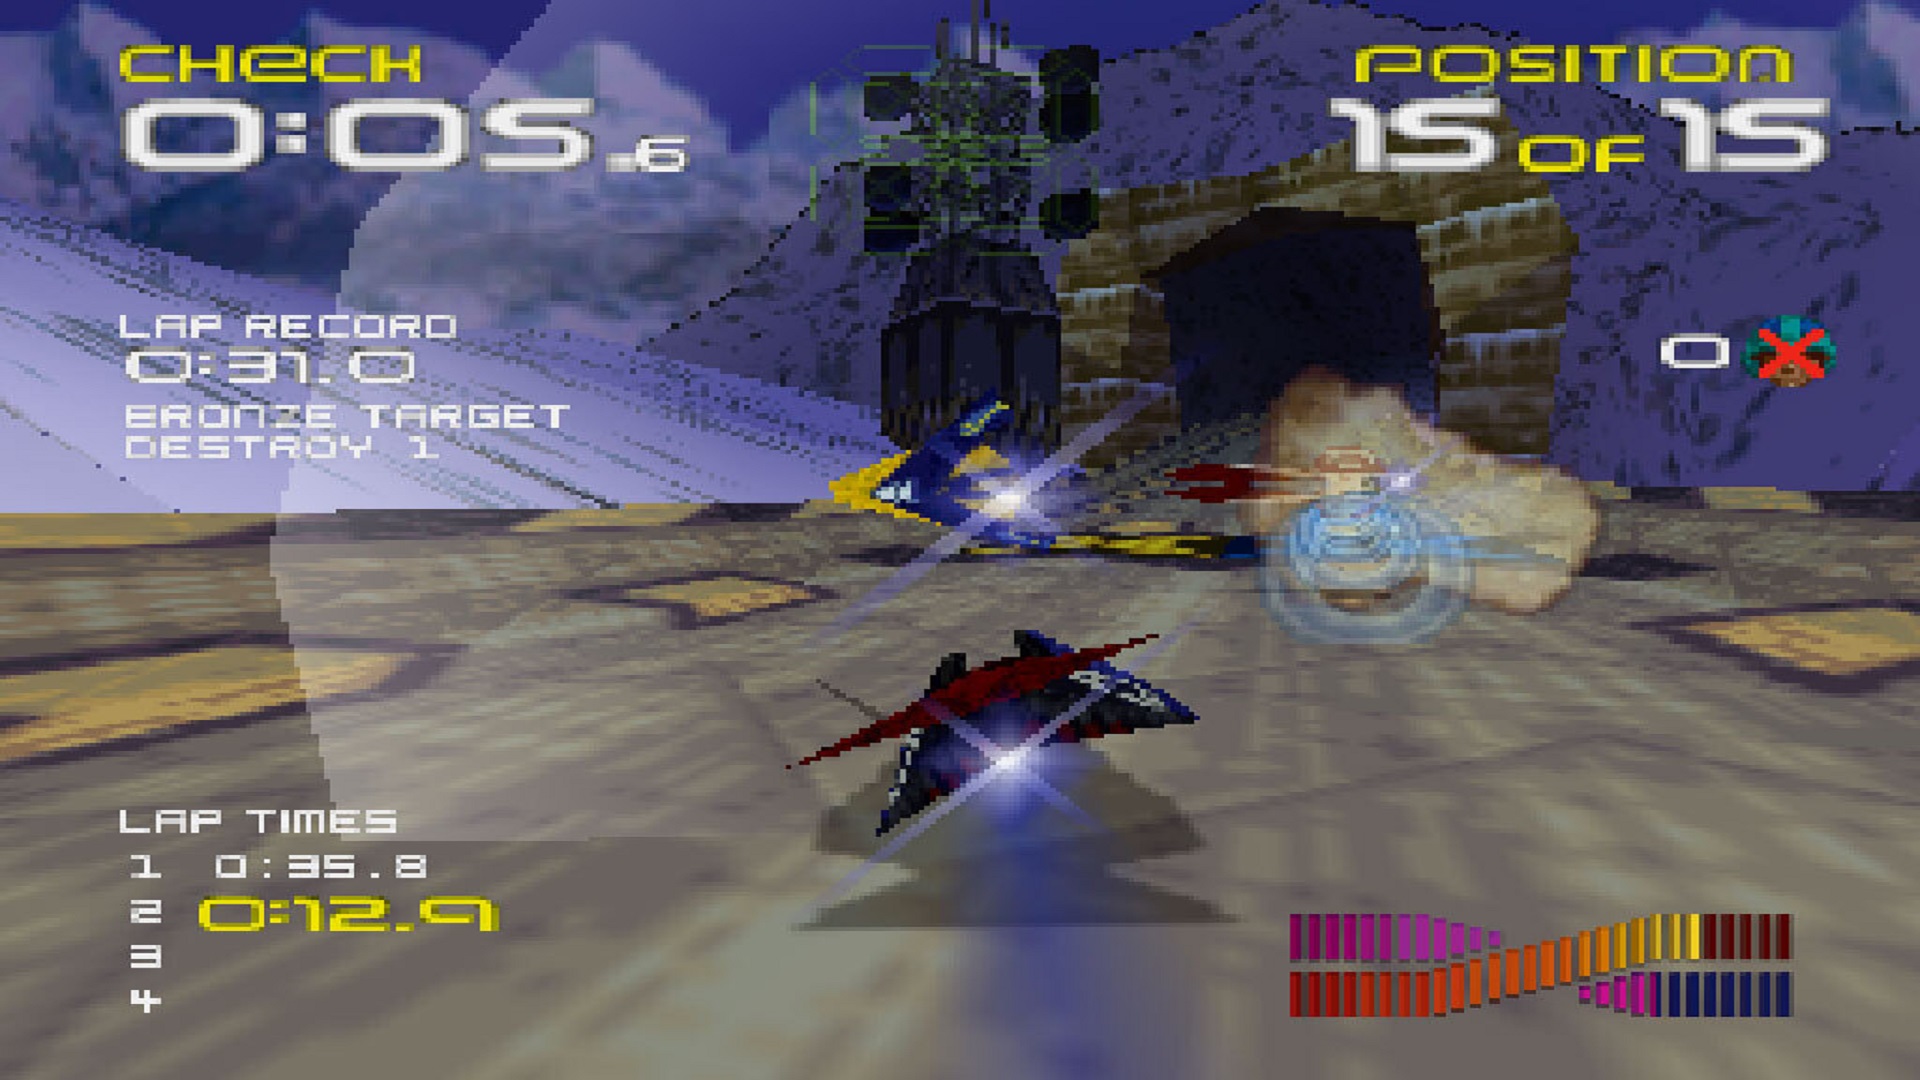 Wipeout 64